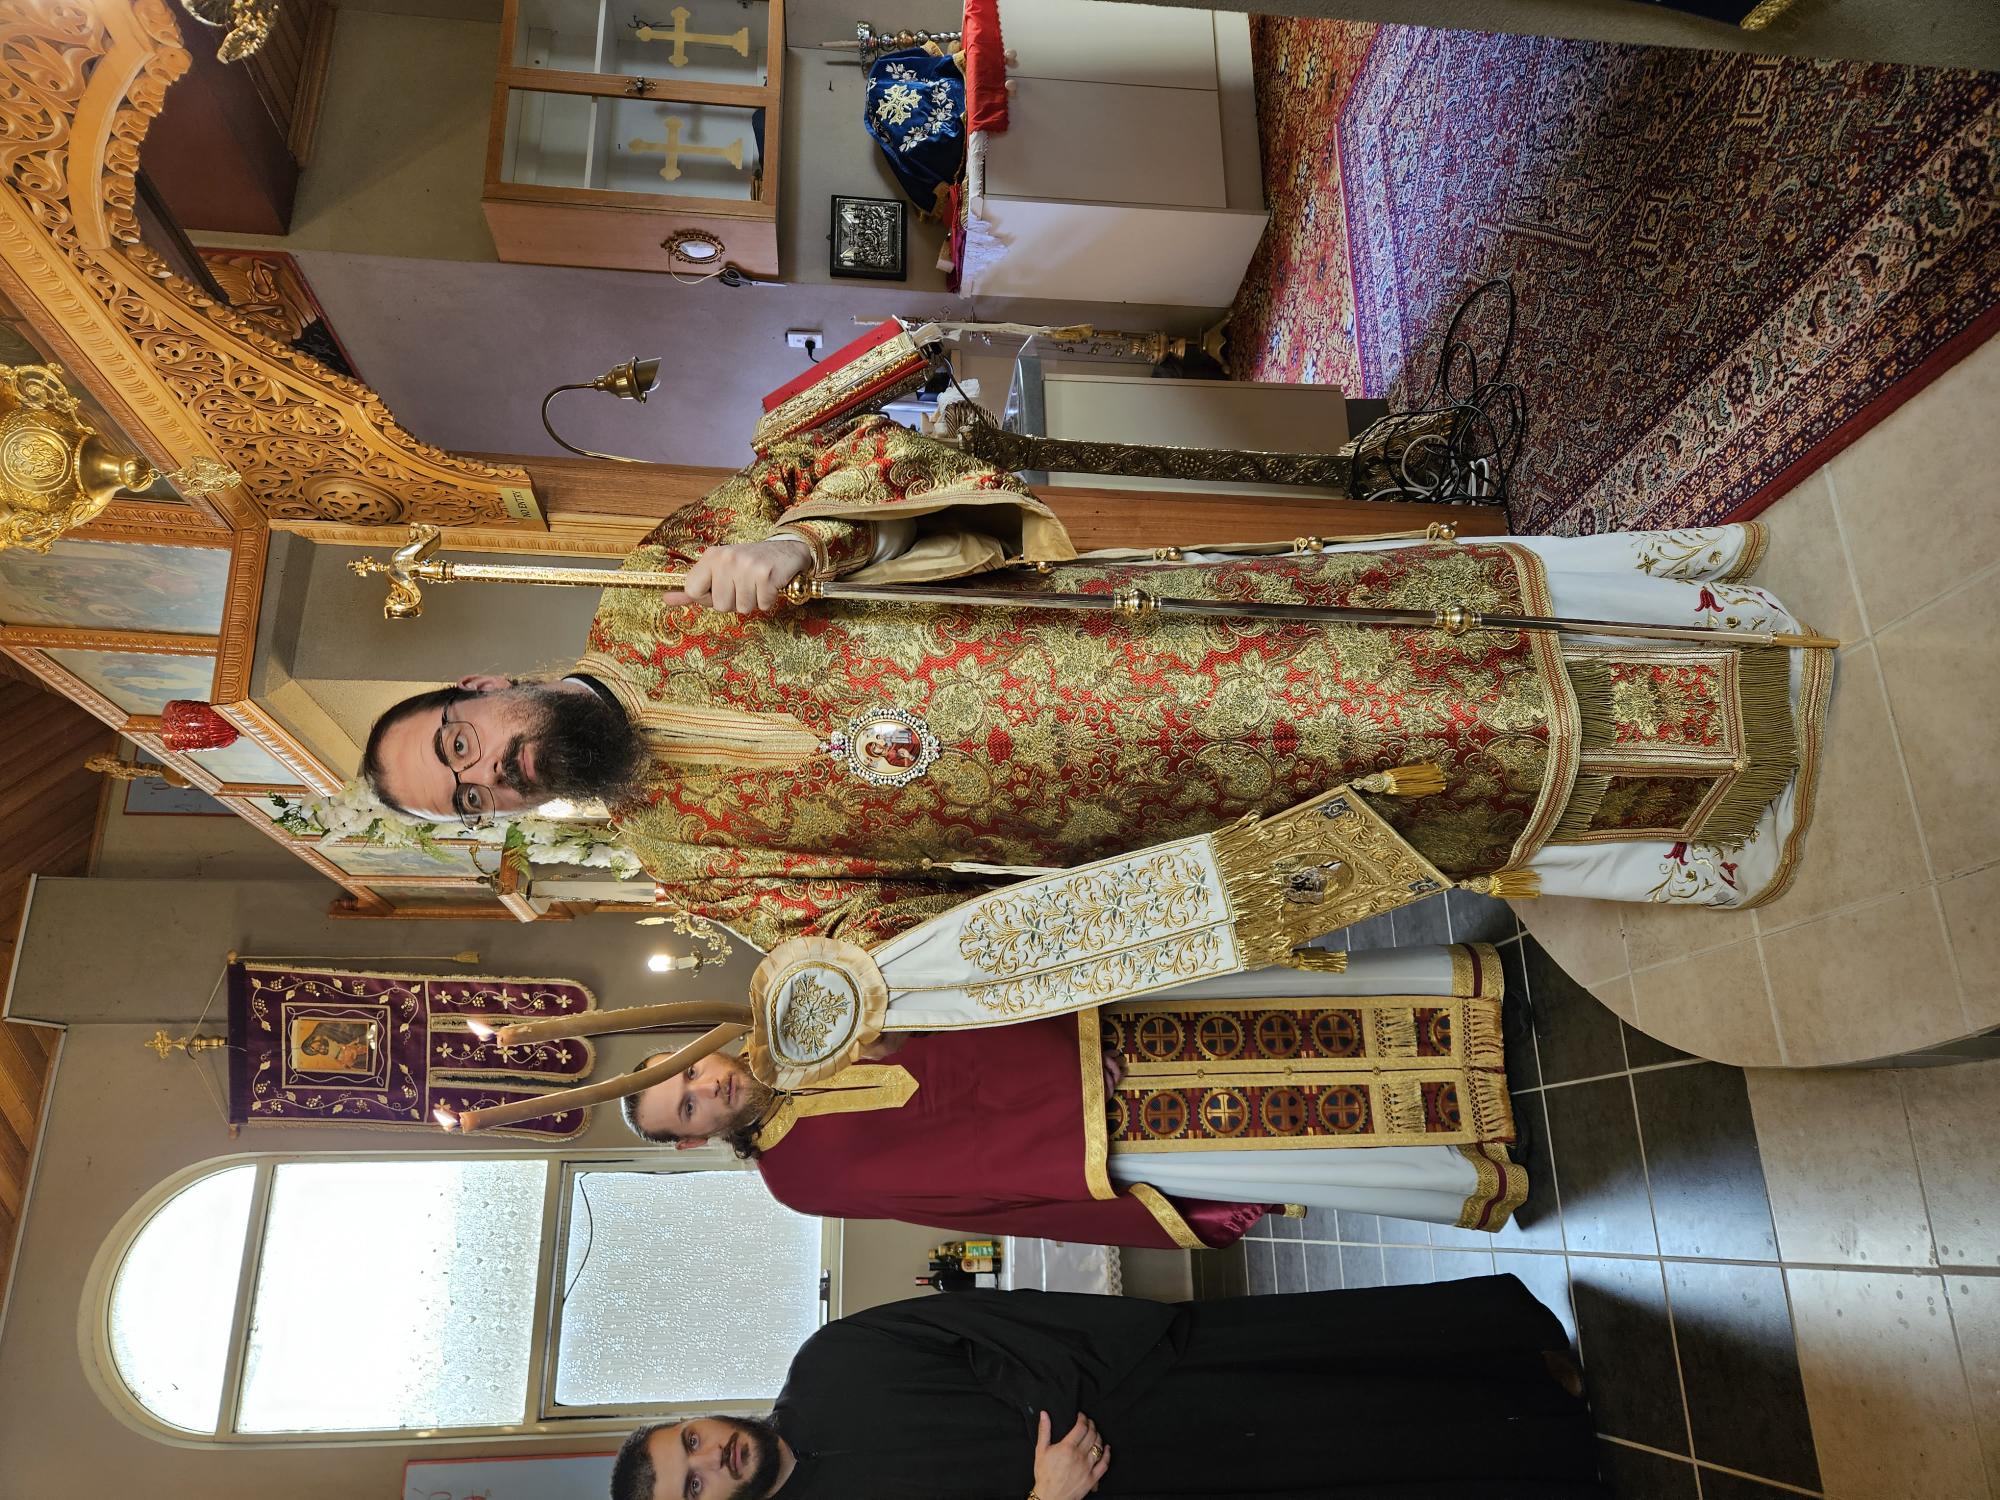 Feast Day of the Synaxis of the Most Holy Mother of God at the Church of Our Lady the Merciful in Bacchus Marsh